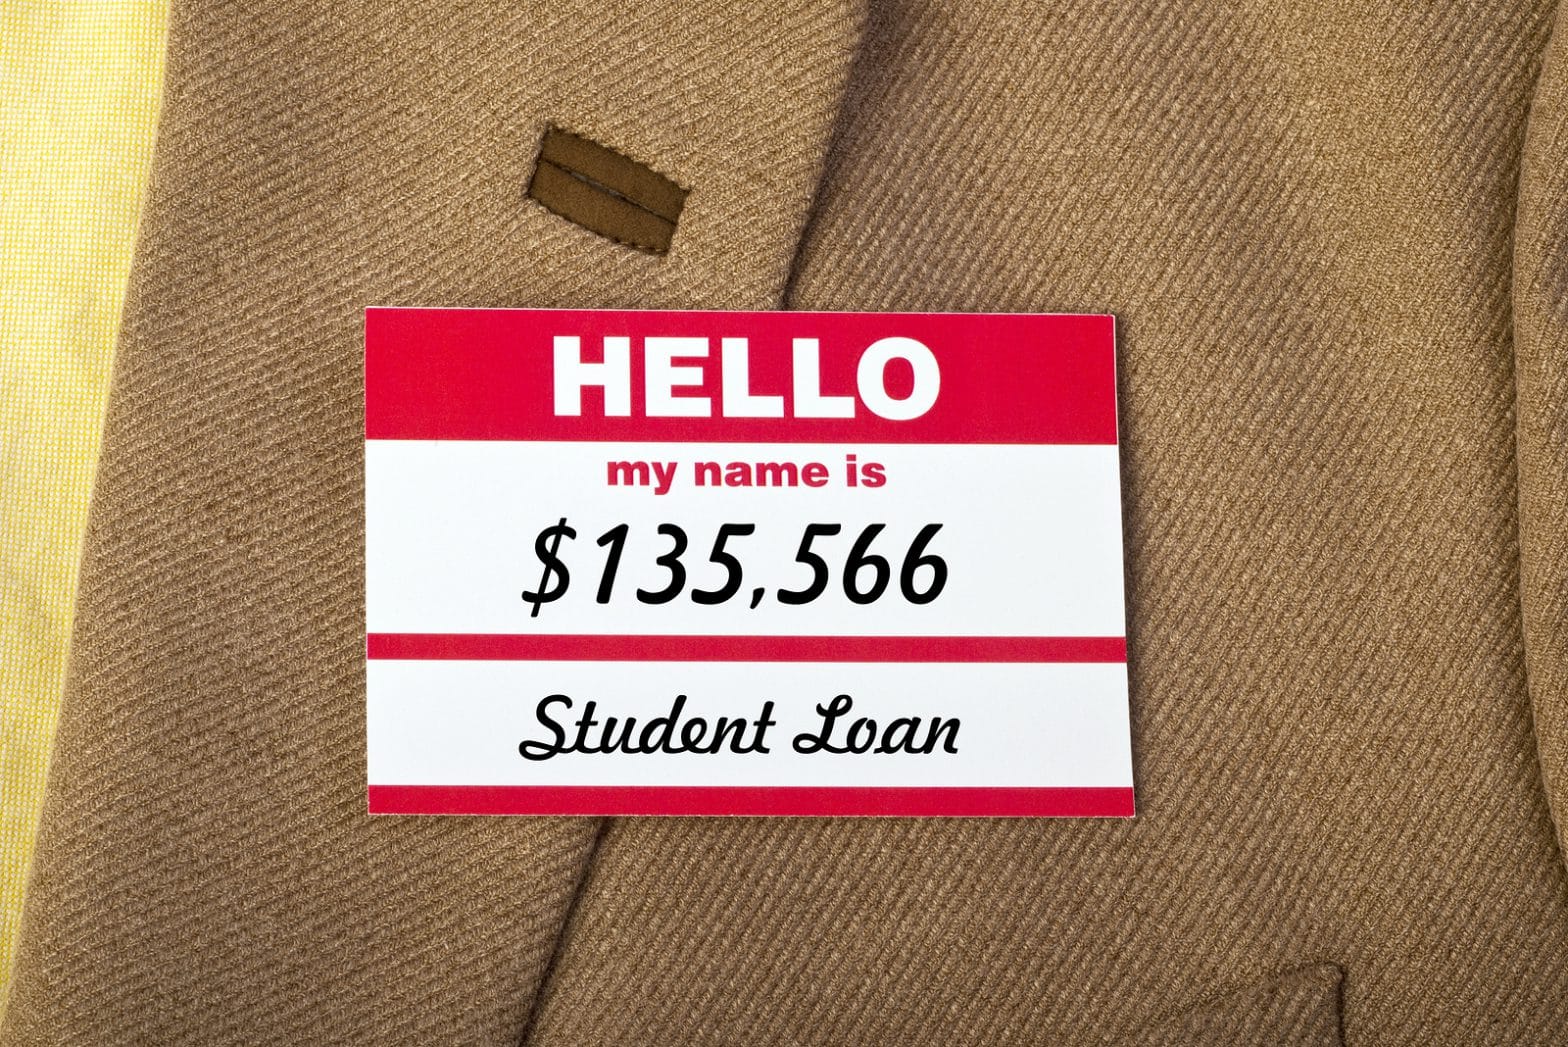 Get to know your student loans